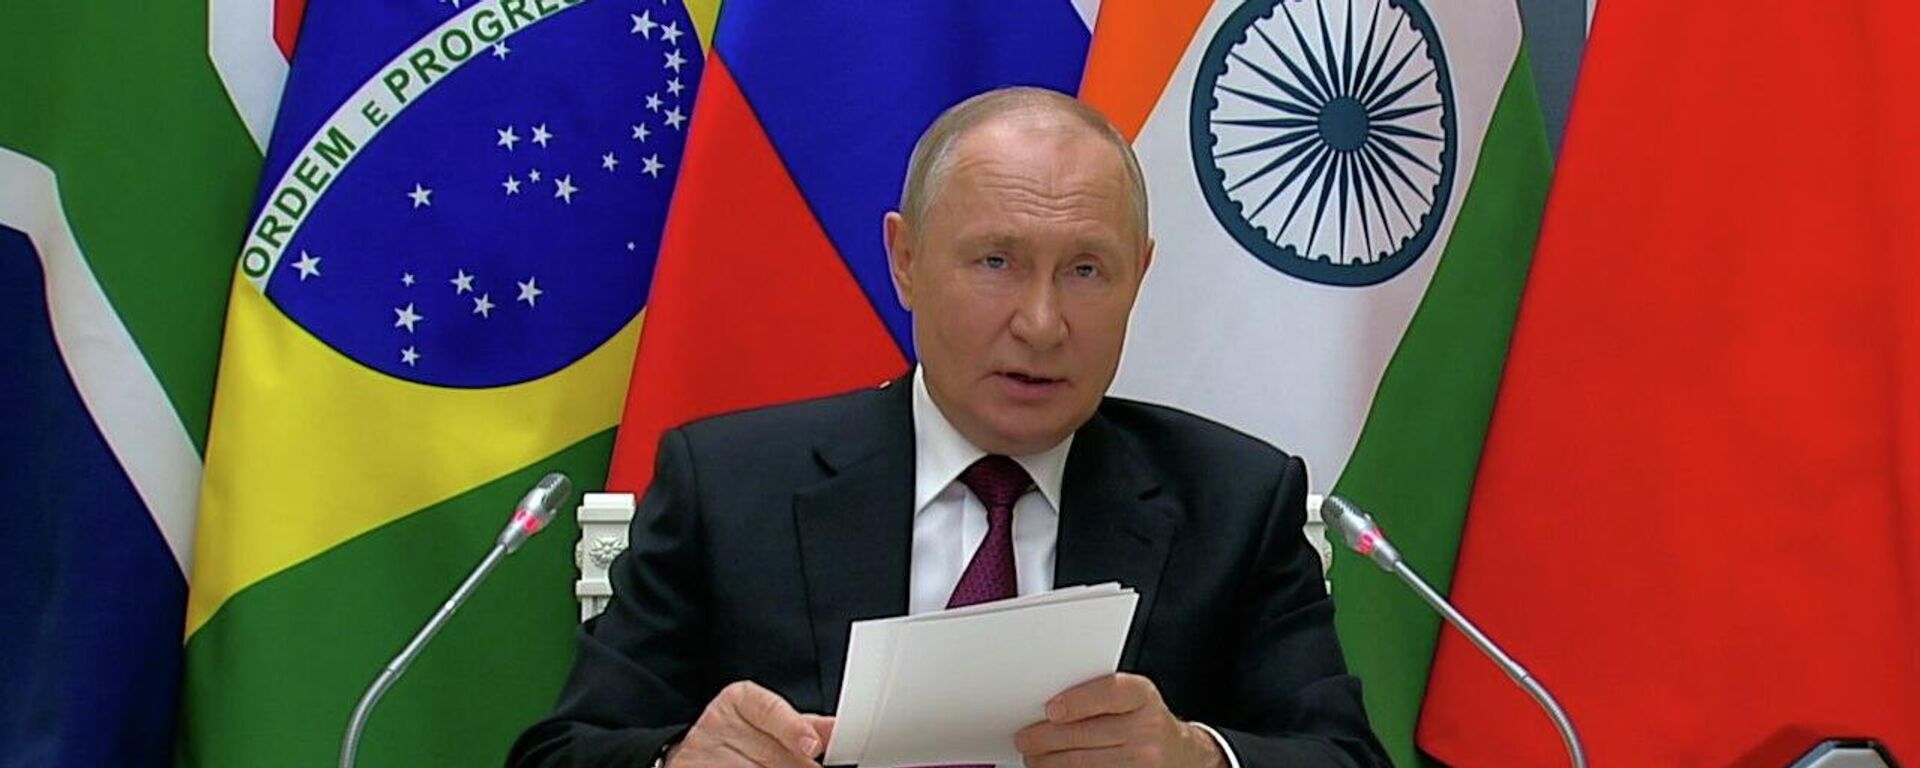 Russia's President Vladimir Putin delivers a speech during the 15th BRICS Summit held on 22-24 August - Sputnik Africa, 1920, 23.08.2023